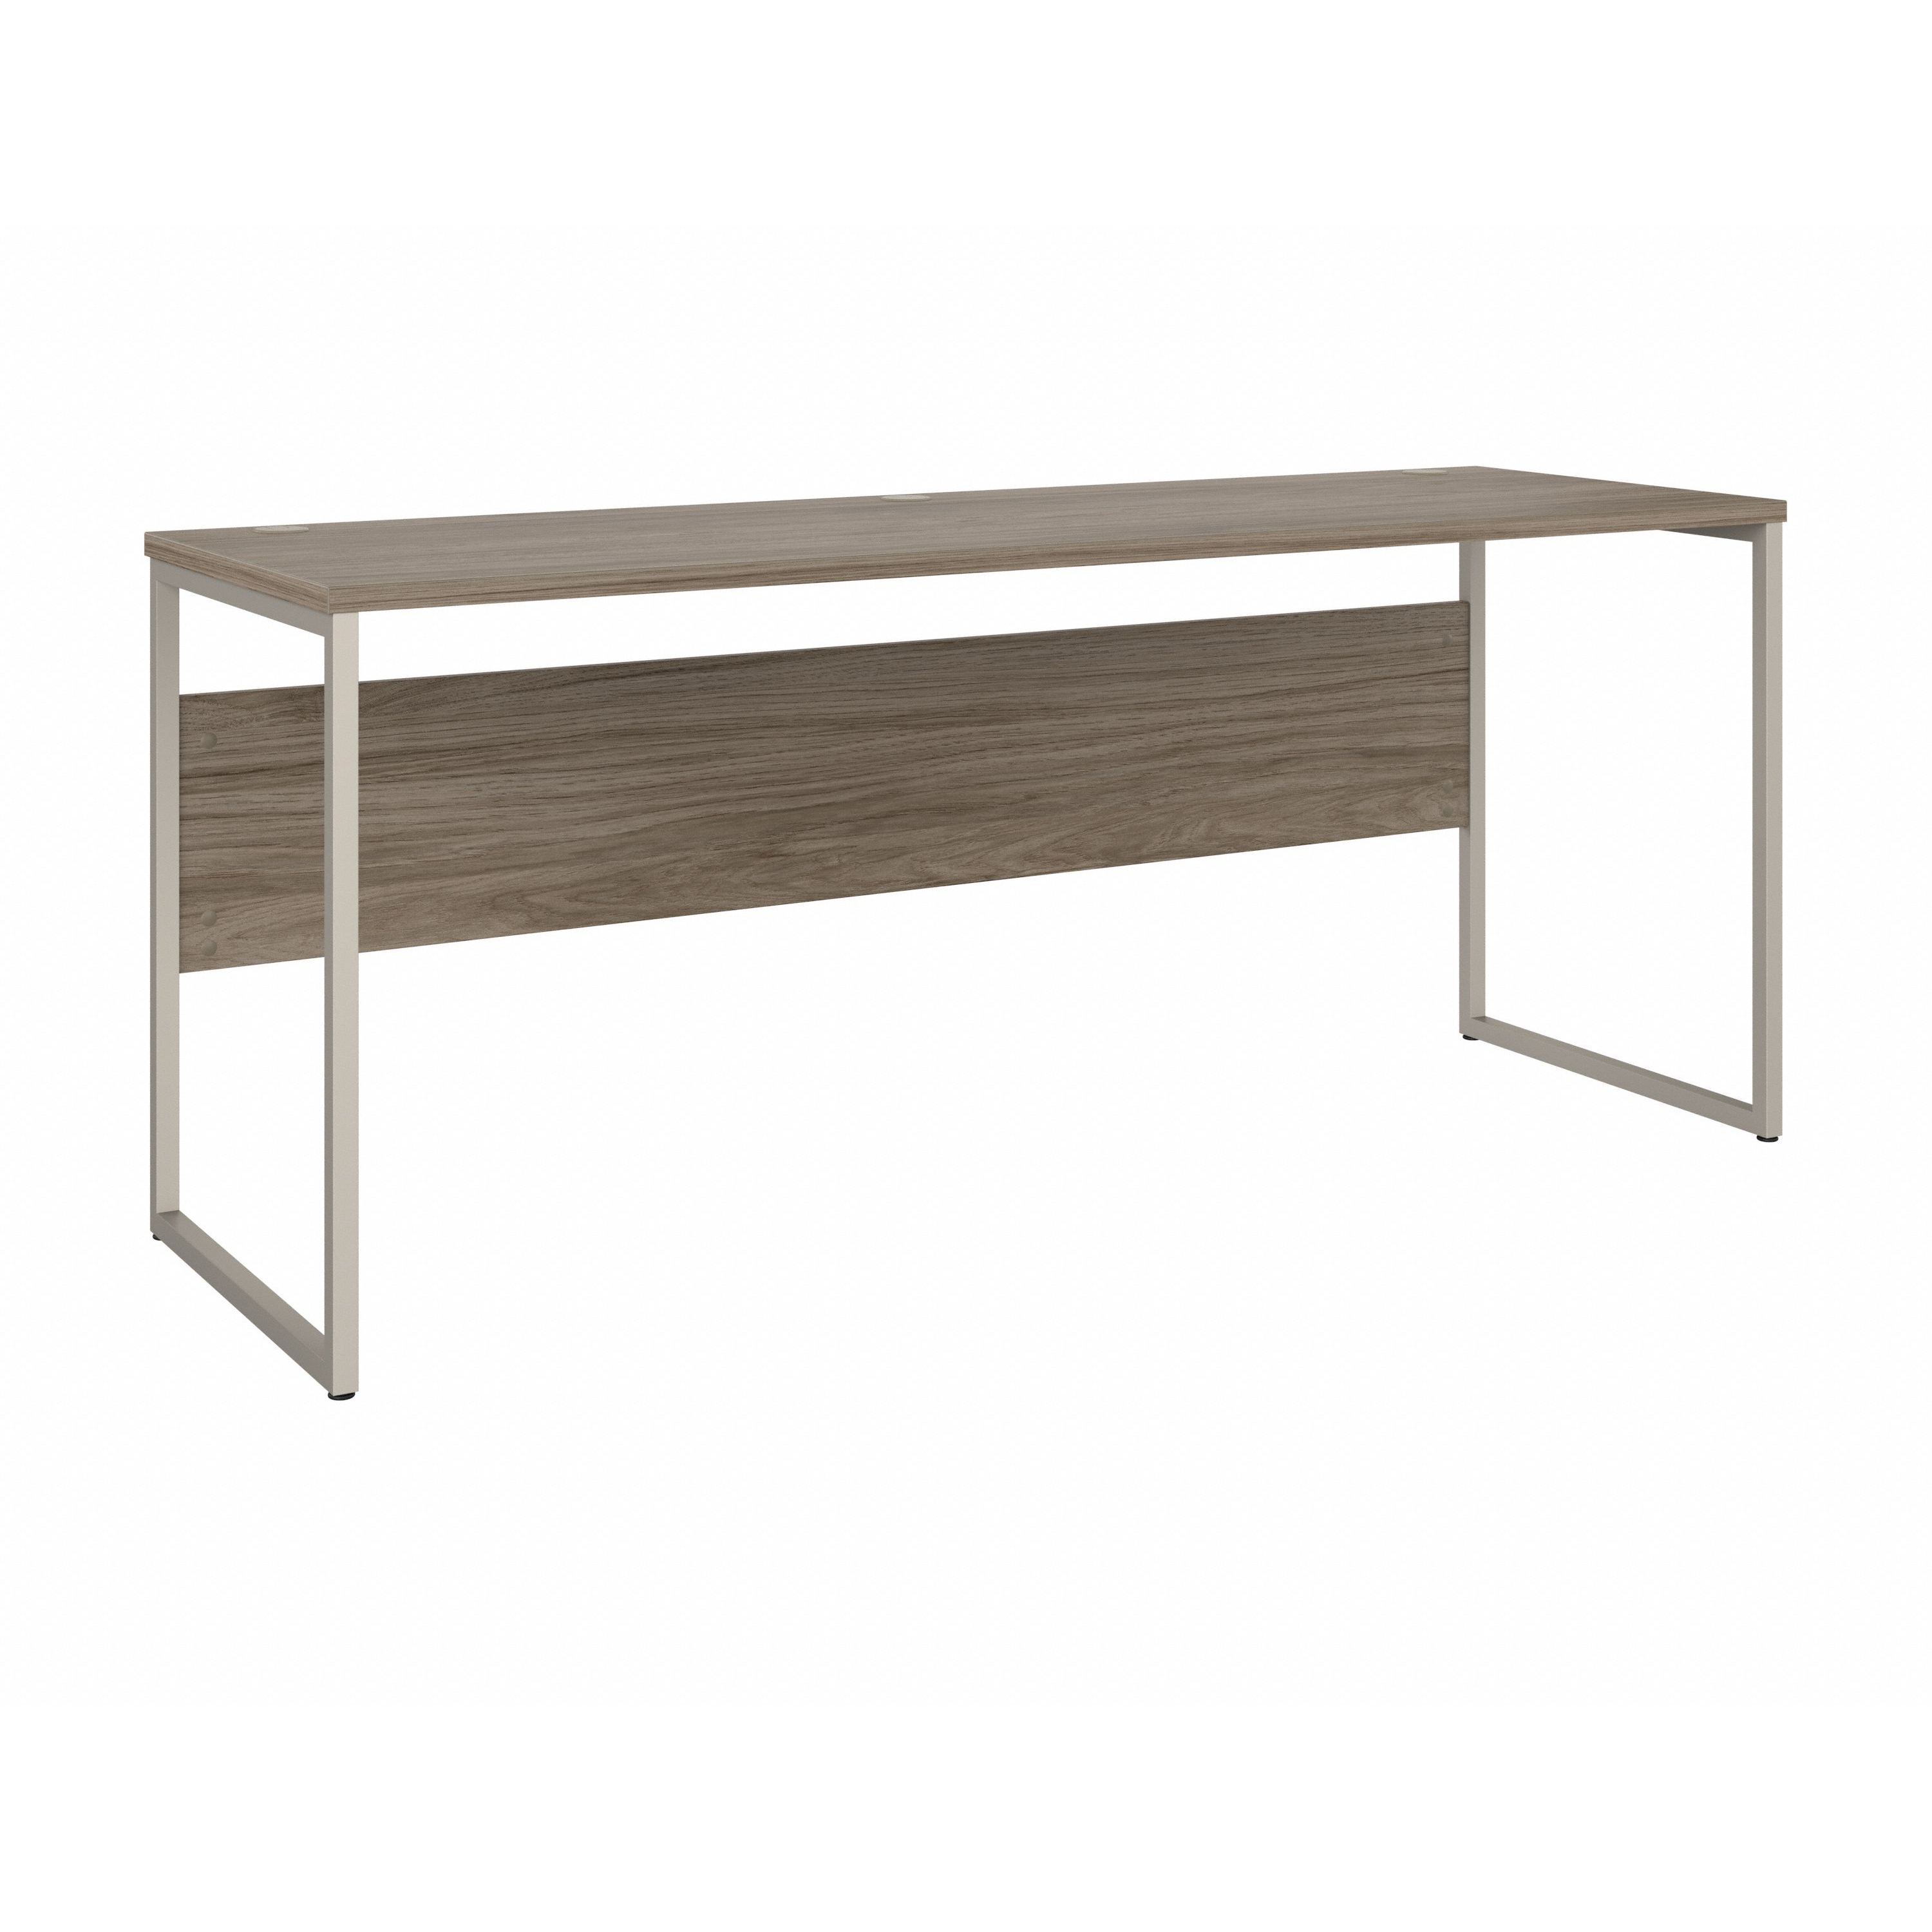 Shop Bush Business Furniture Hybrid 72W x 24D Computer Table Desk with Metal Legs 02 HYD272MH #color_modern hickory